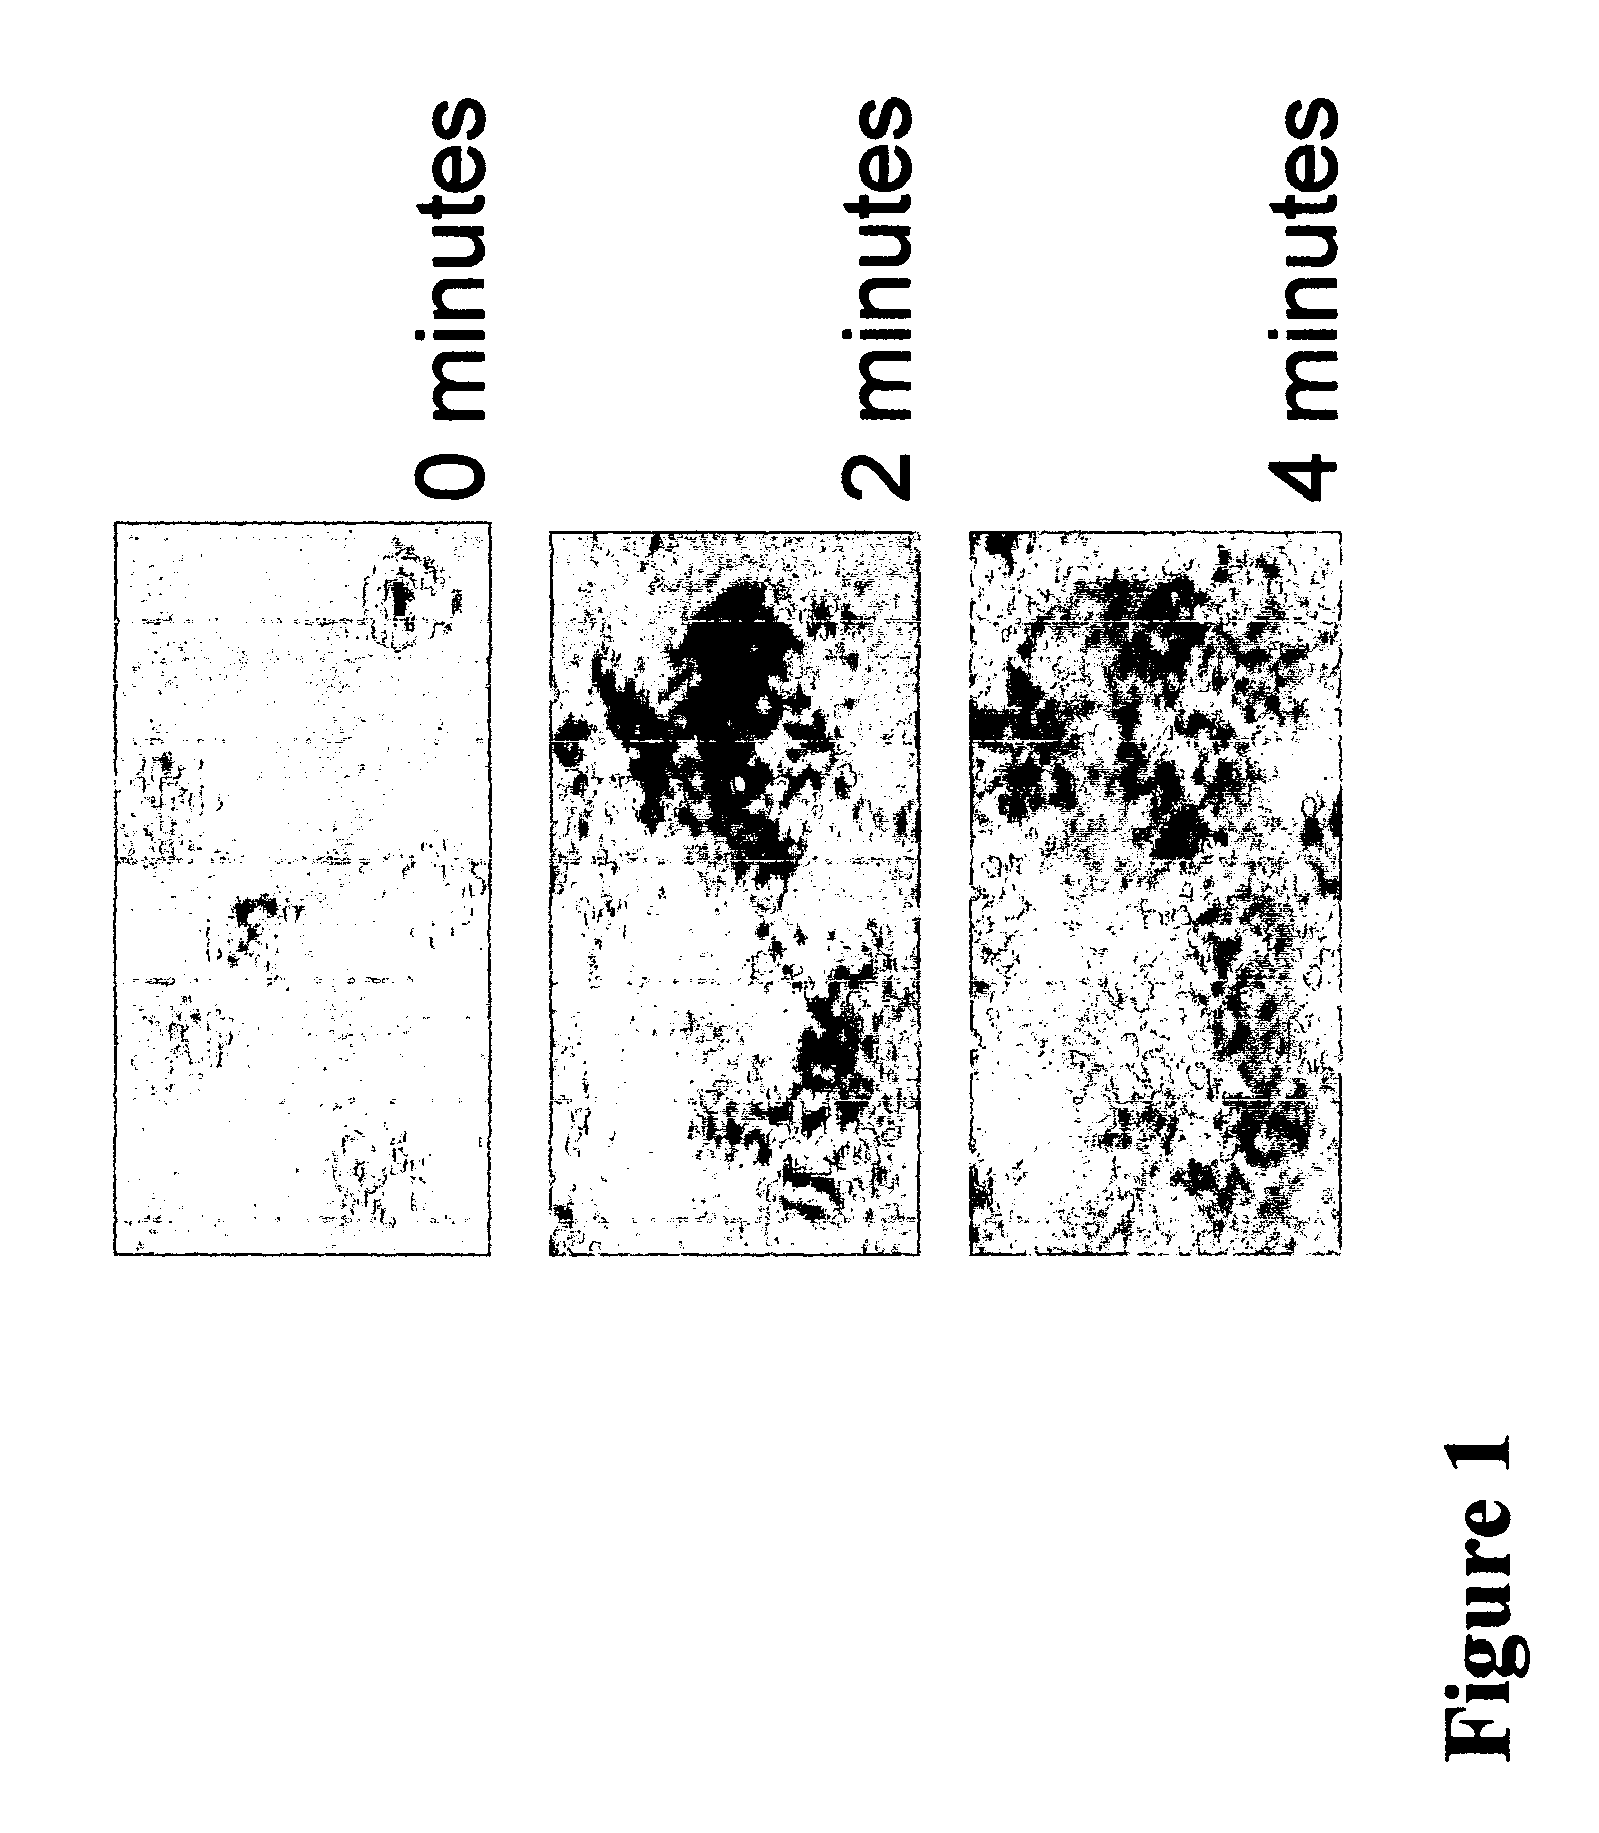 Apparatus and method to measure platelet contractility